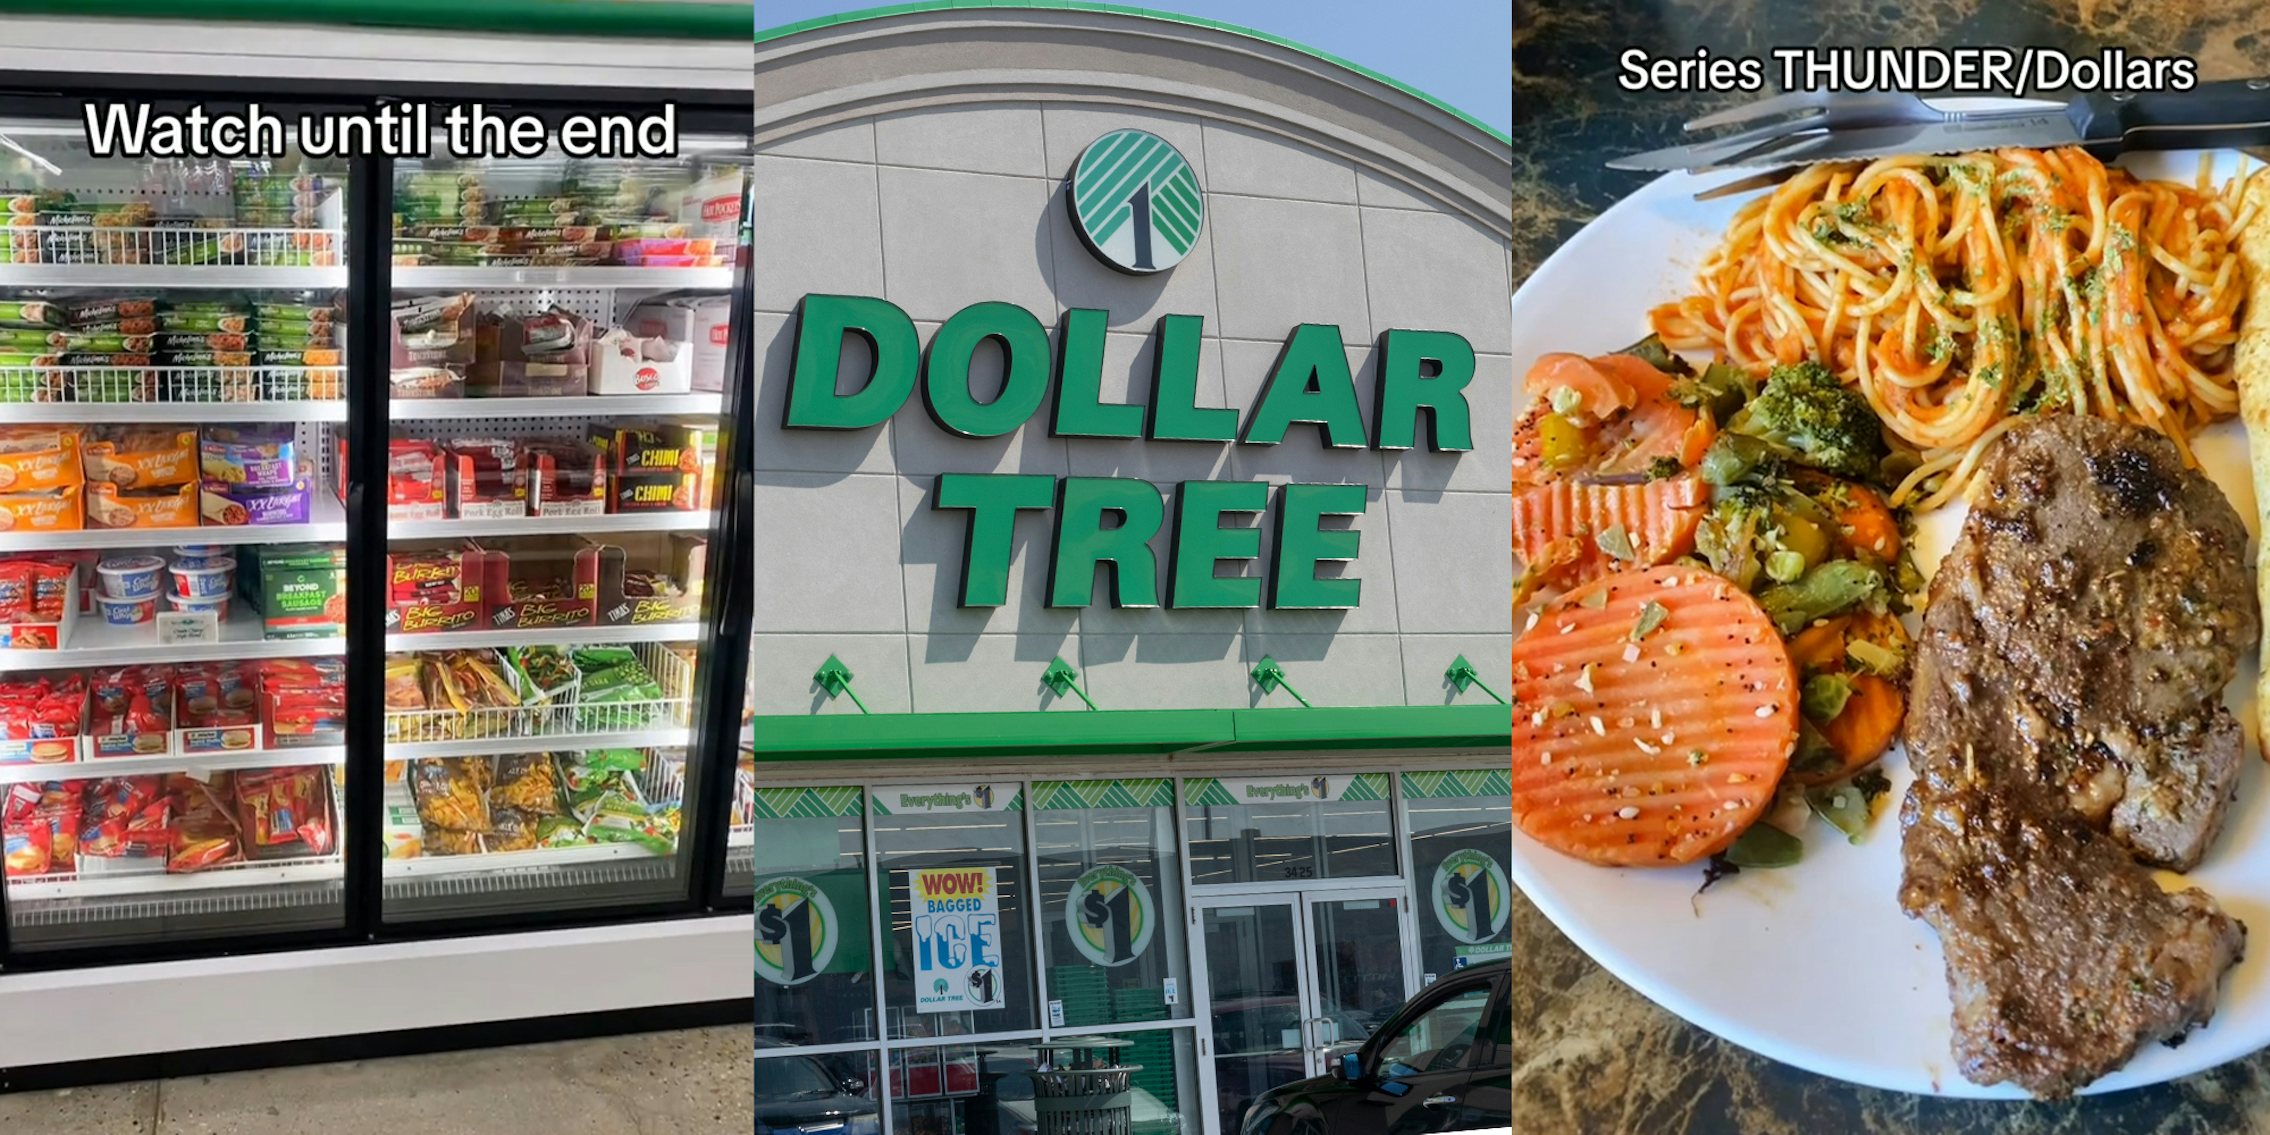 Front view of store refrigerator filled with groceries; Dollar Tree Store Front; man makes a steak dinner with only items from Dollar Tree